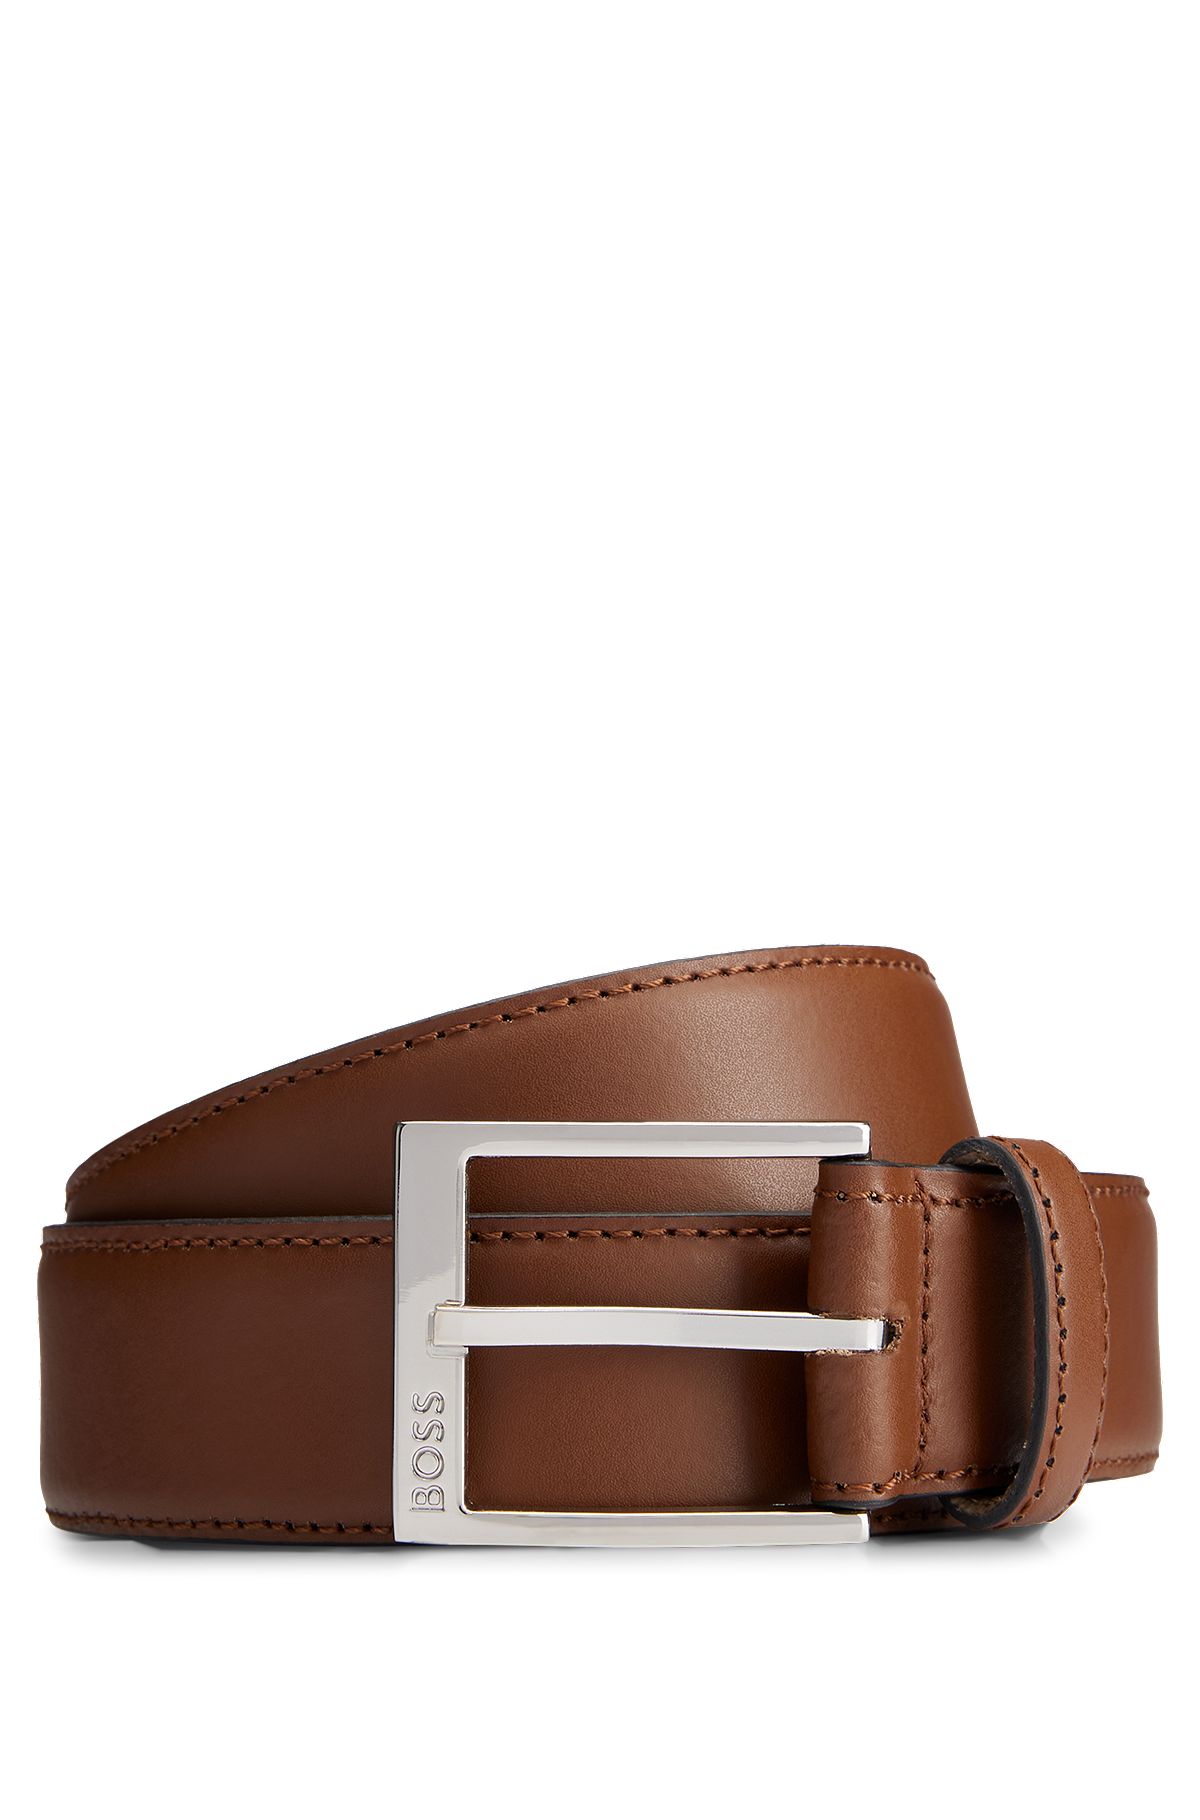 Italian-leather belt with logo buckle, Brown